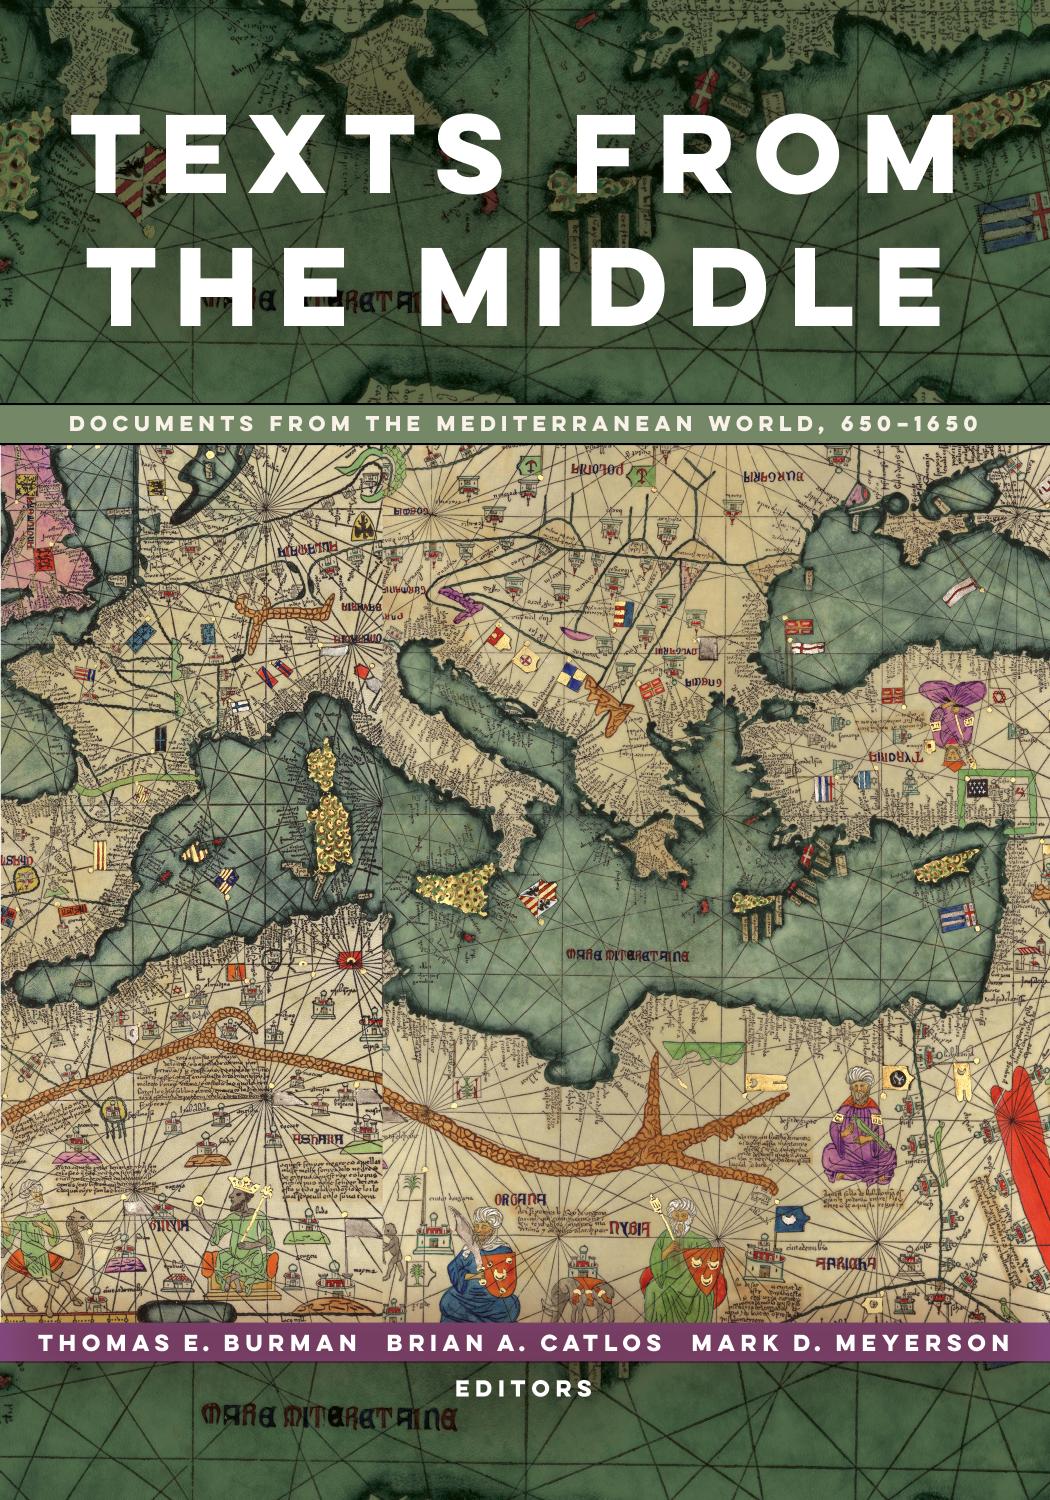 Texts from the Middle: Documents from the Mediterranean World, 650â1650 by Thomas E Burman Brian A. Catlos Mark D. Meyerson